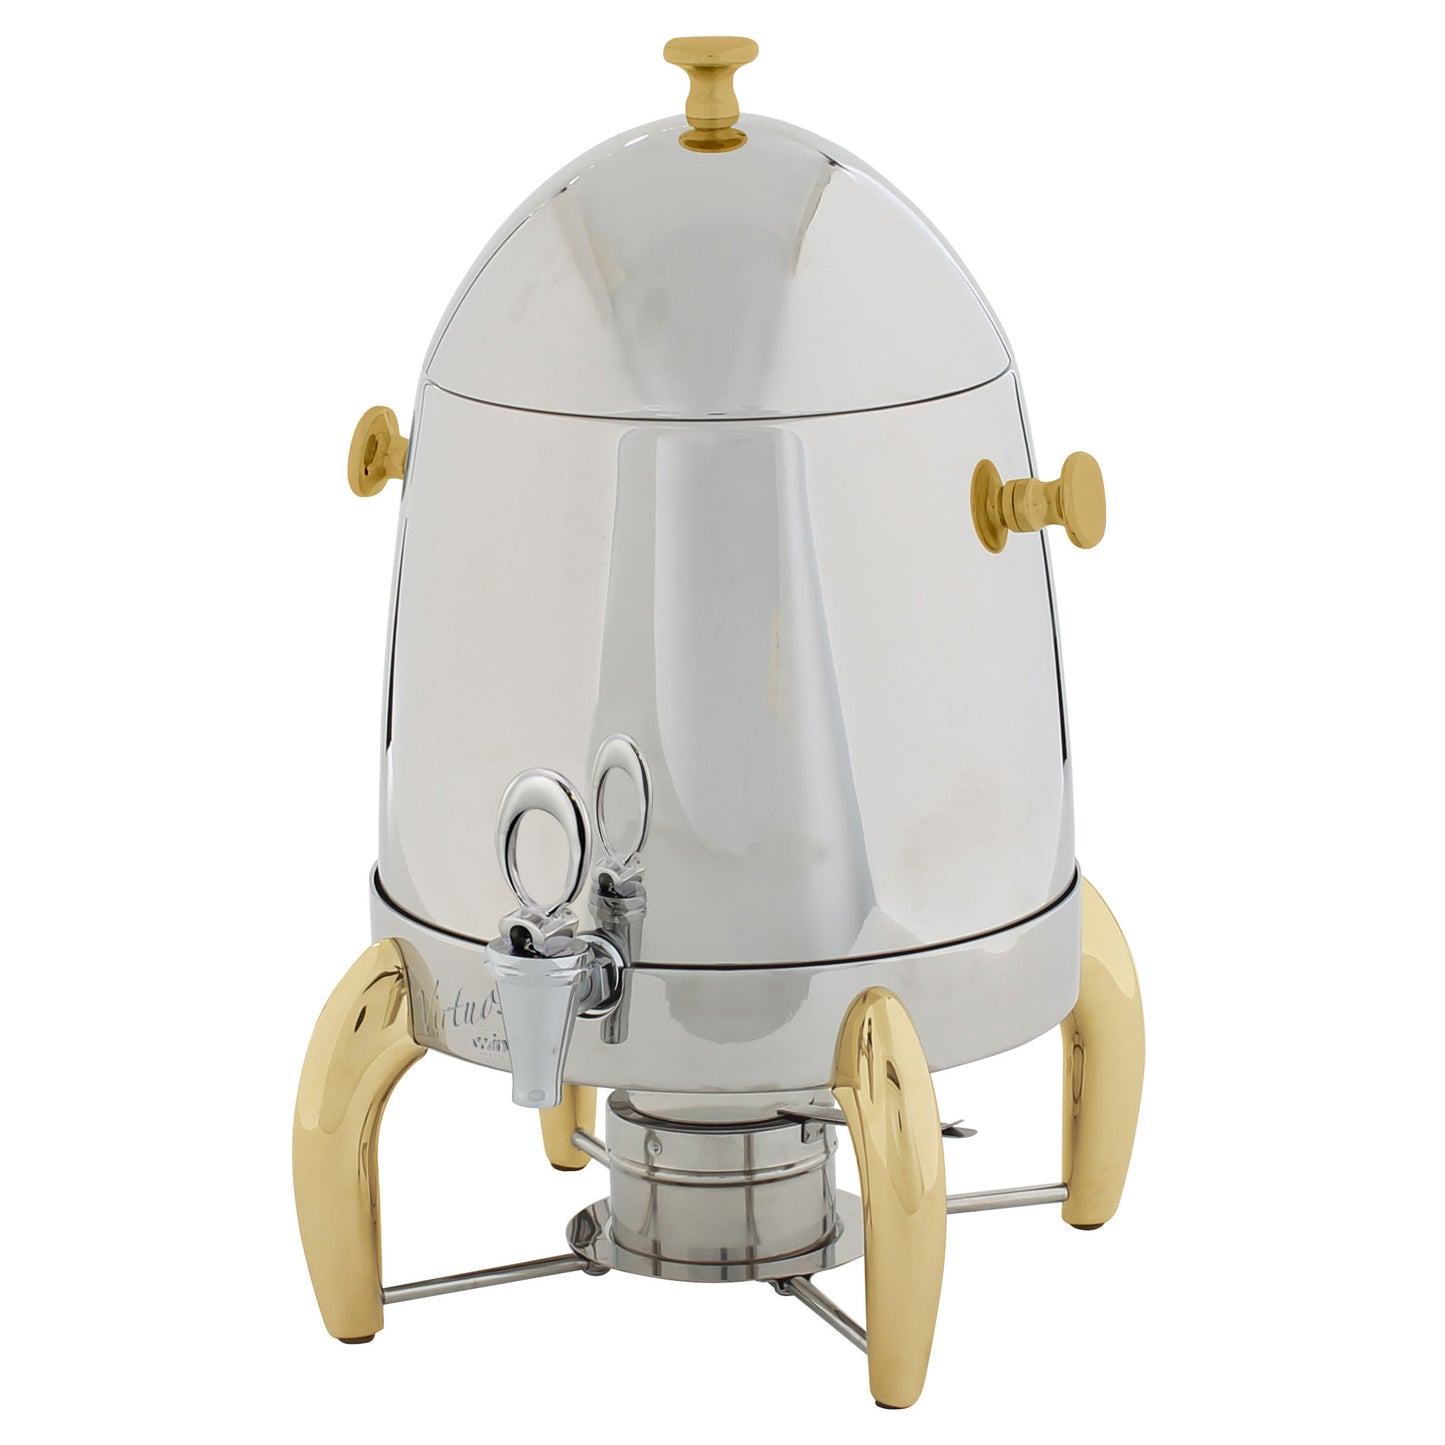 903A - Virtuoso Collection Coffee Urn - 3 Gallons